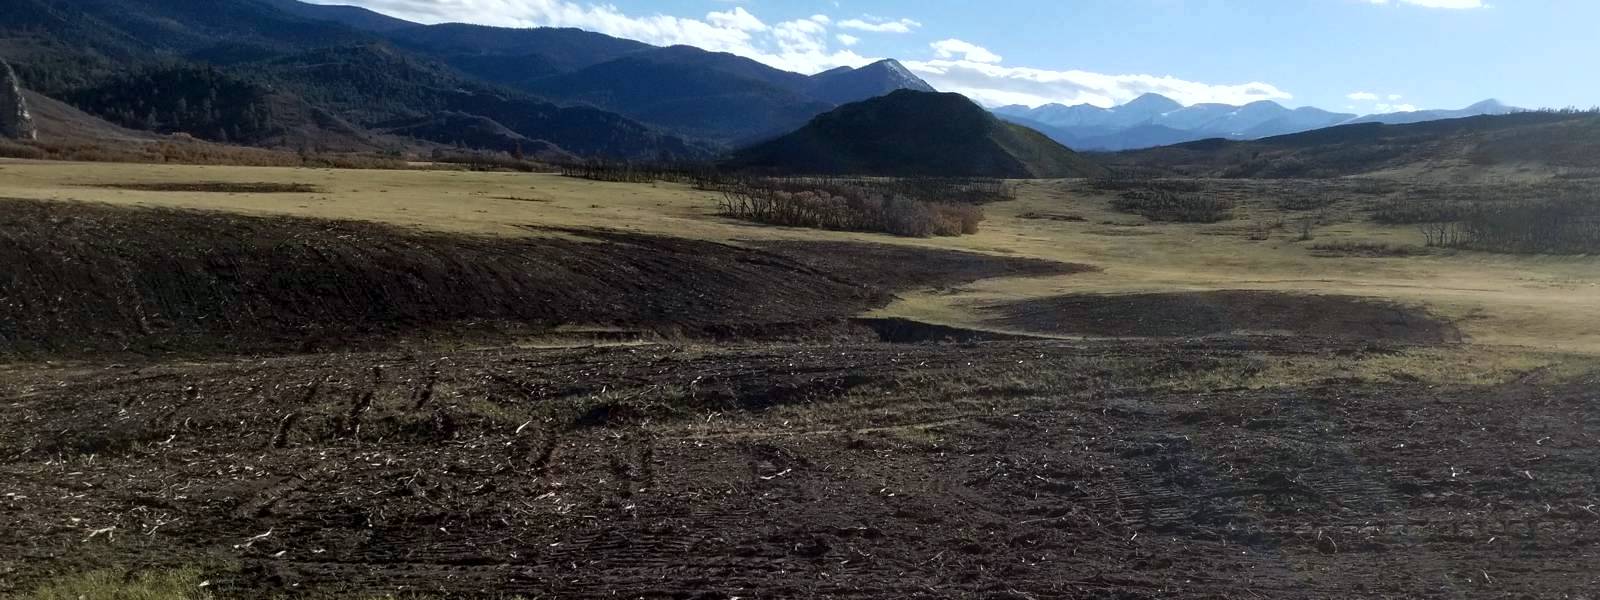 Excavating and Land Clearing by Wayne Arnold in La Veta and Huerfano County